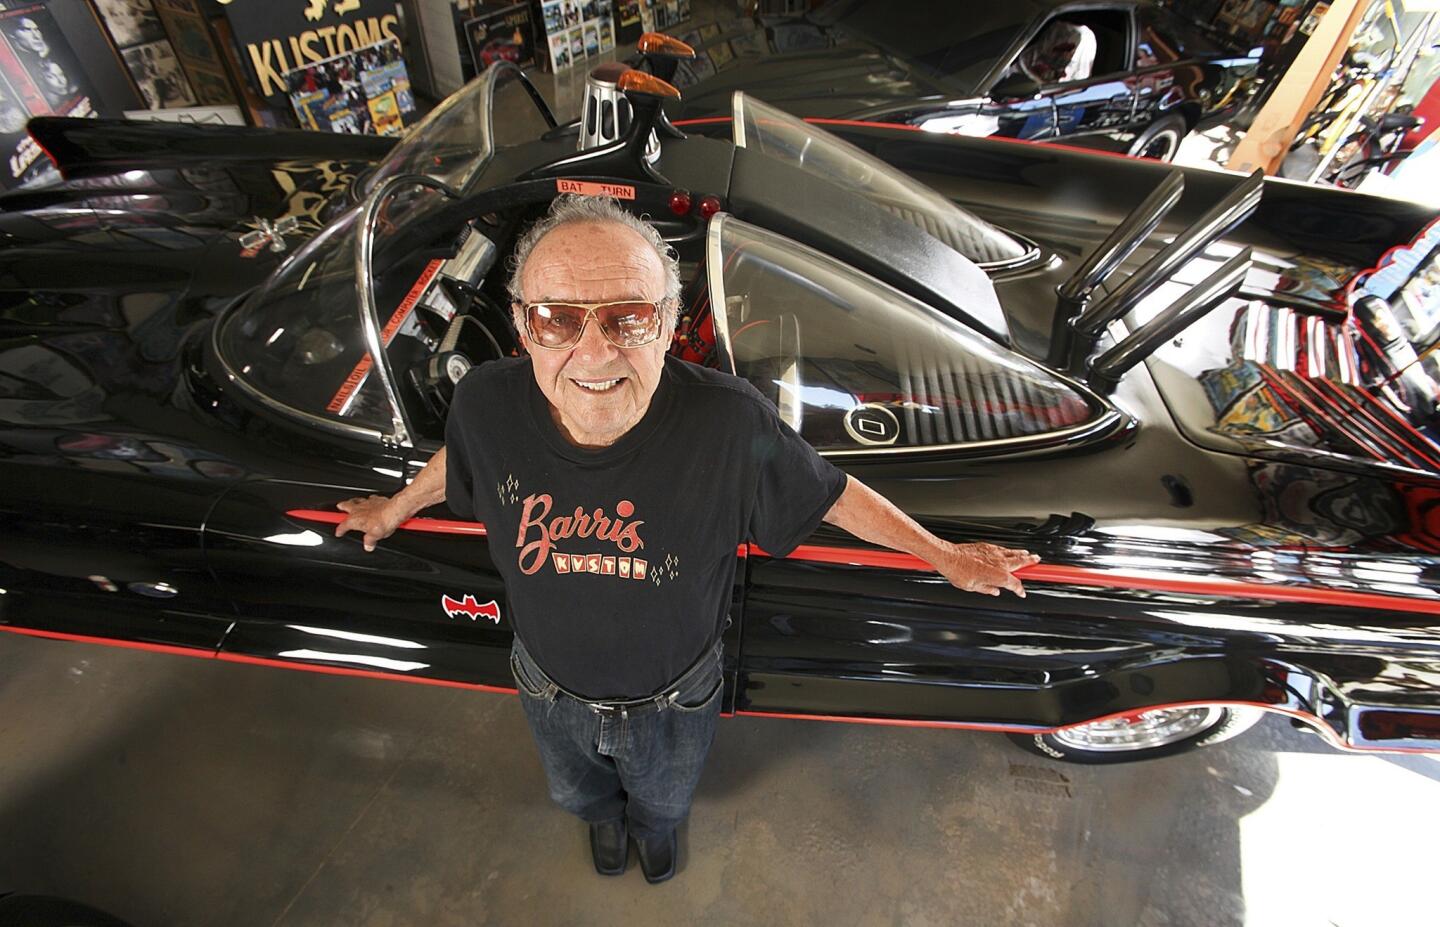 Car customizer George Barris, 87, stands next to the original Batmobile at Barris Kustom Industries in North Hollywood. Barris designed the car for the 1966 television show "Batman," which starred Adam West and Burt Ward.